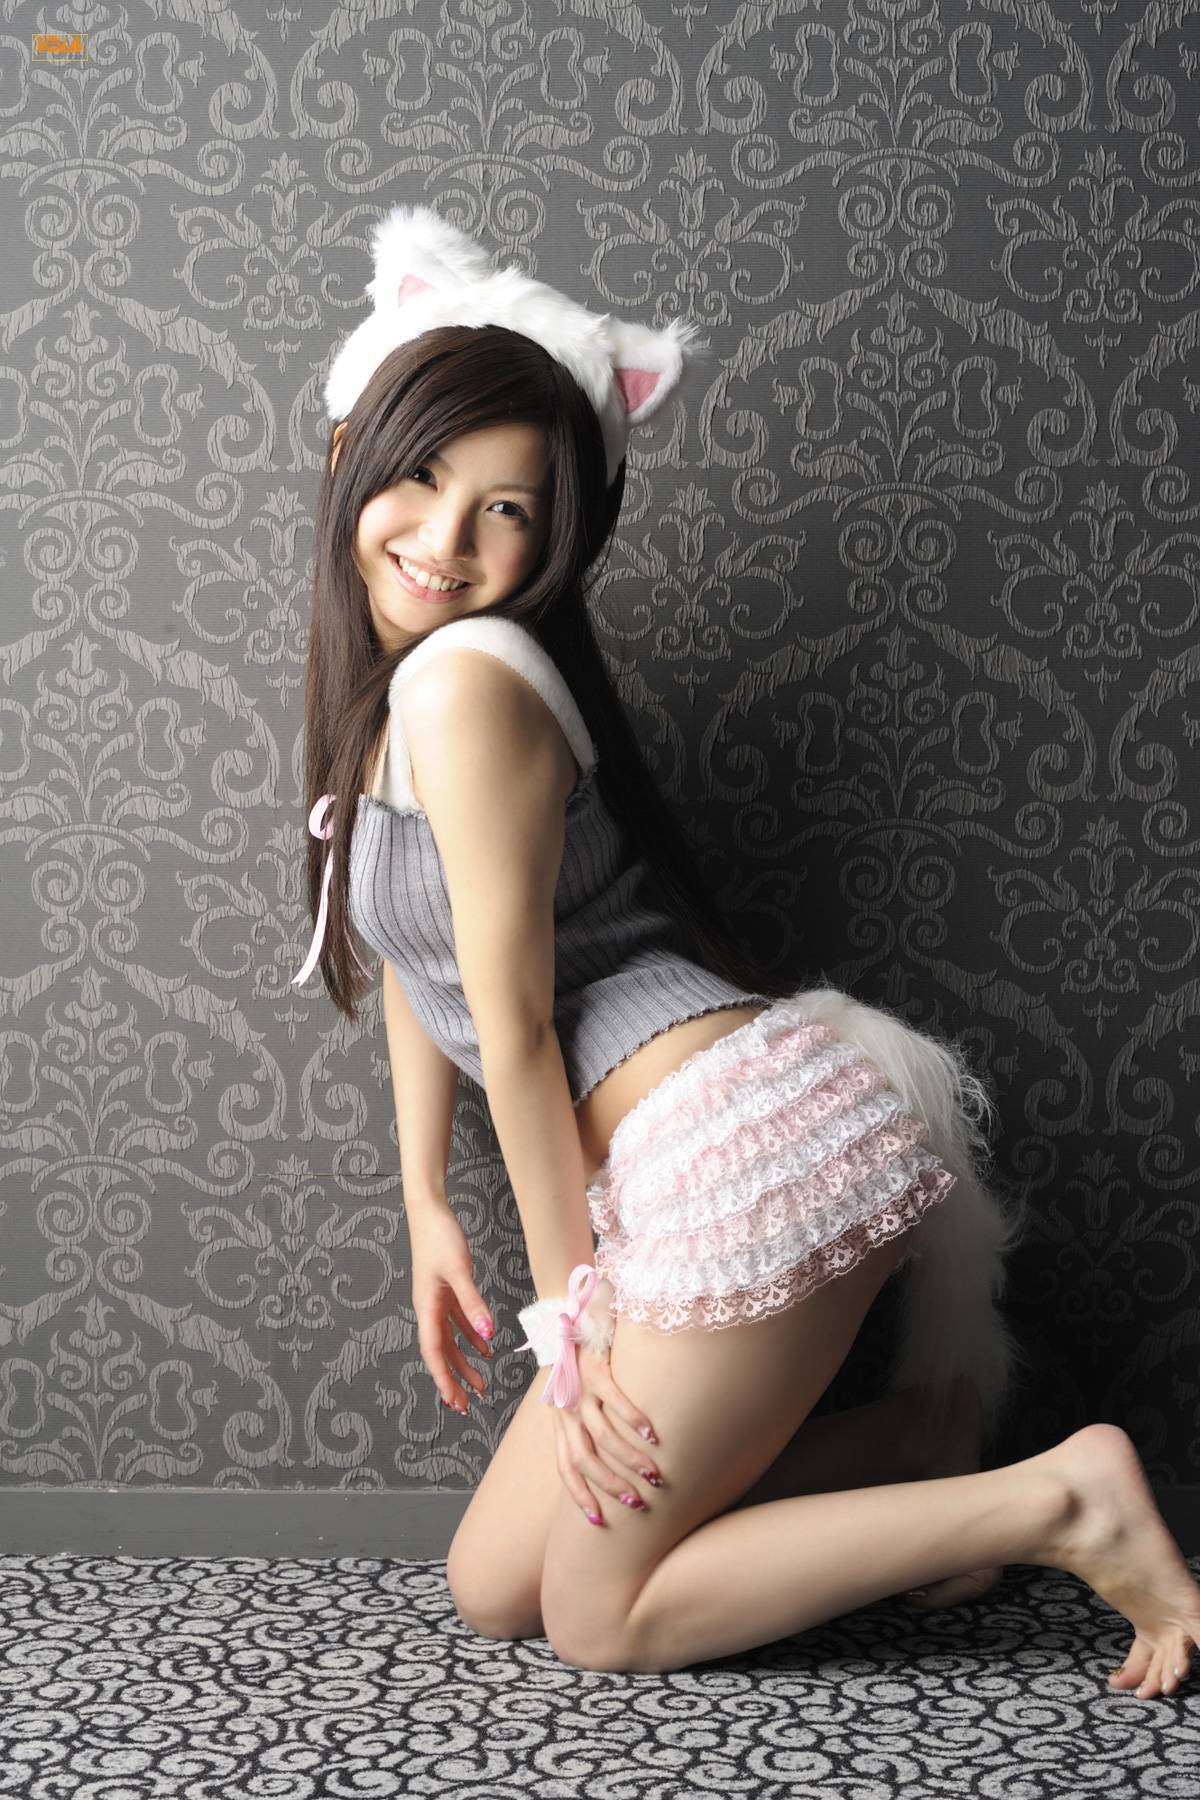 Bibus Music Club ASIA  Bomb.TV  Pictures Japanese sexy beauty pictures